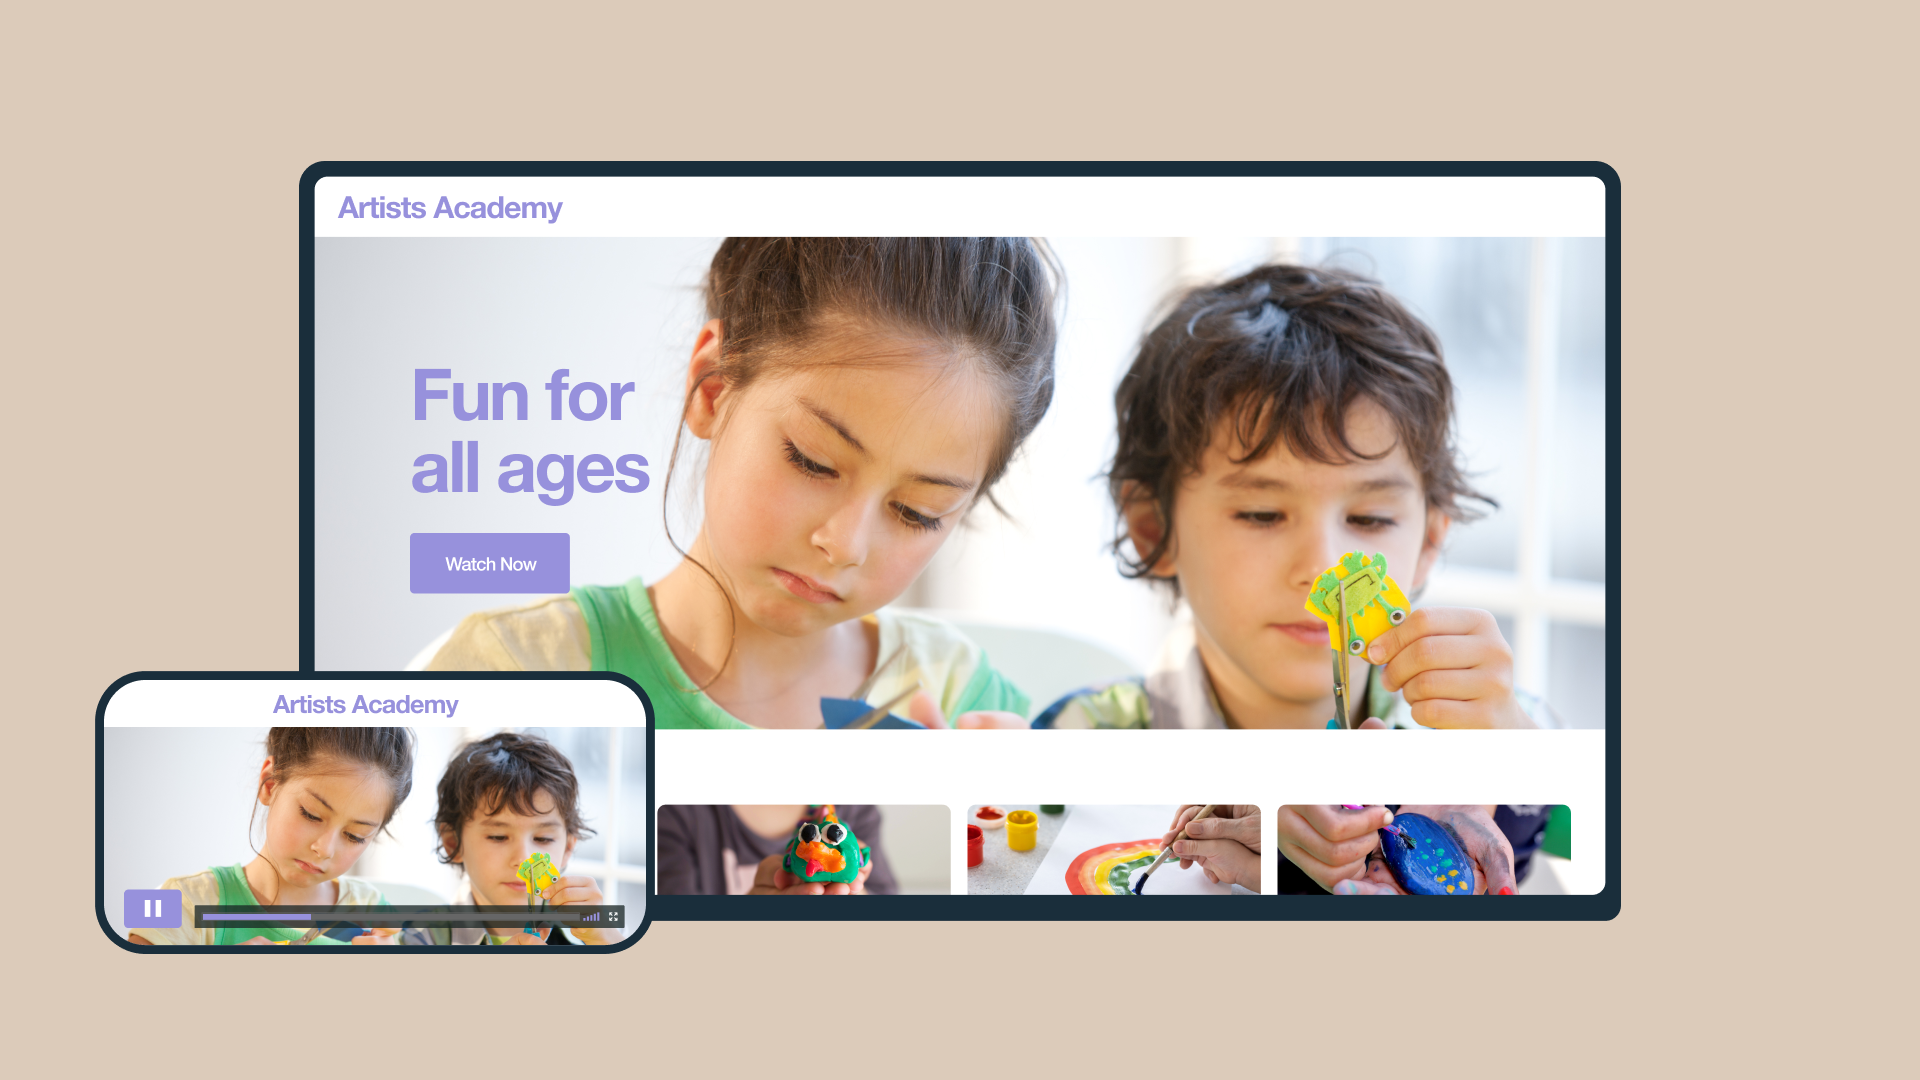 Mock up of an online membership site platform featuring children's learning content on desktop and mobile